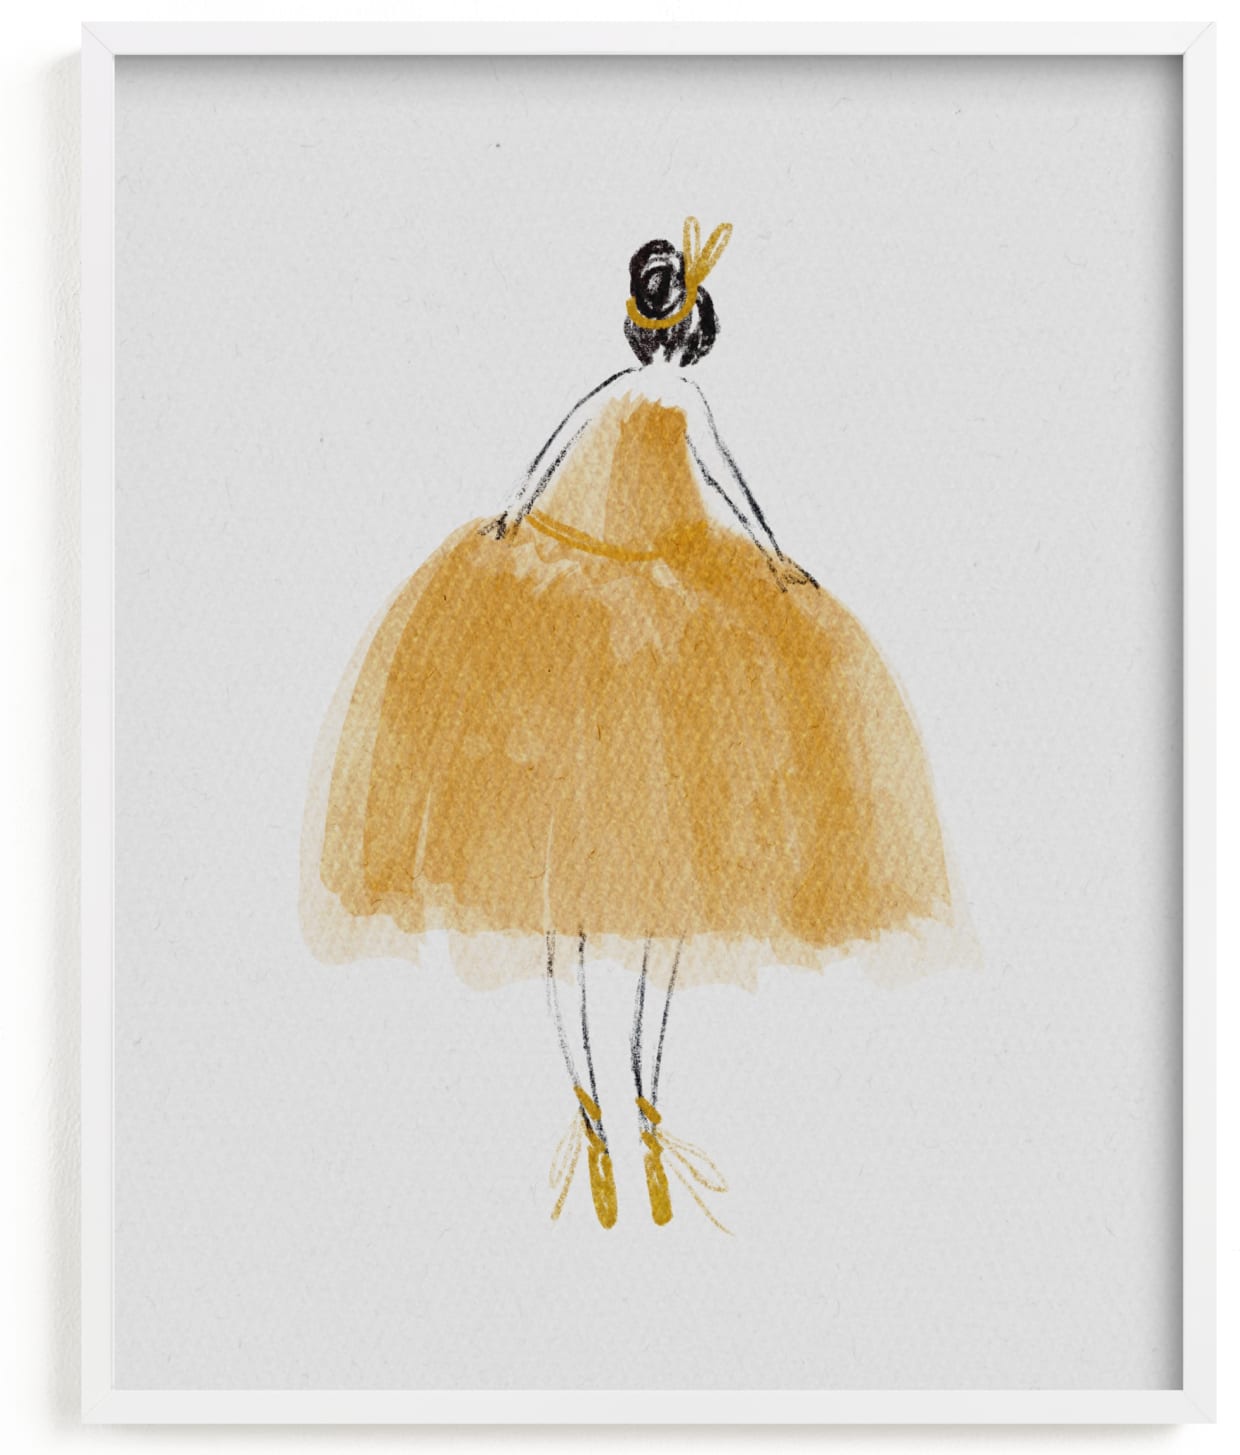 This is a gold kids wall art by Grae called Painted Ballerina.